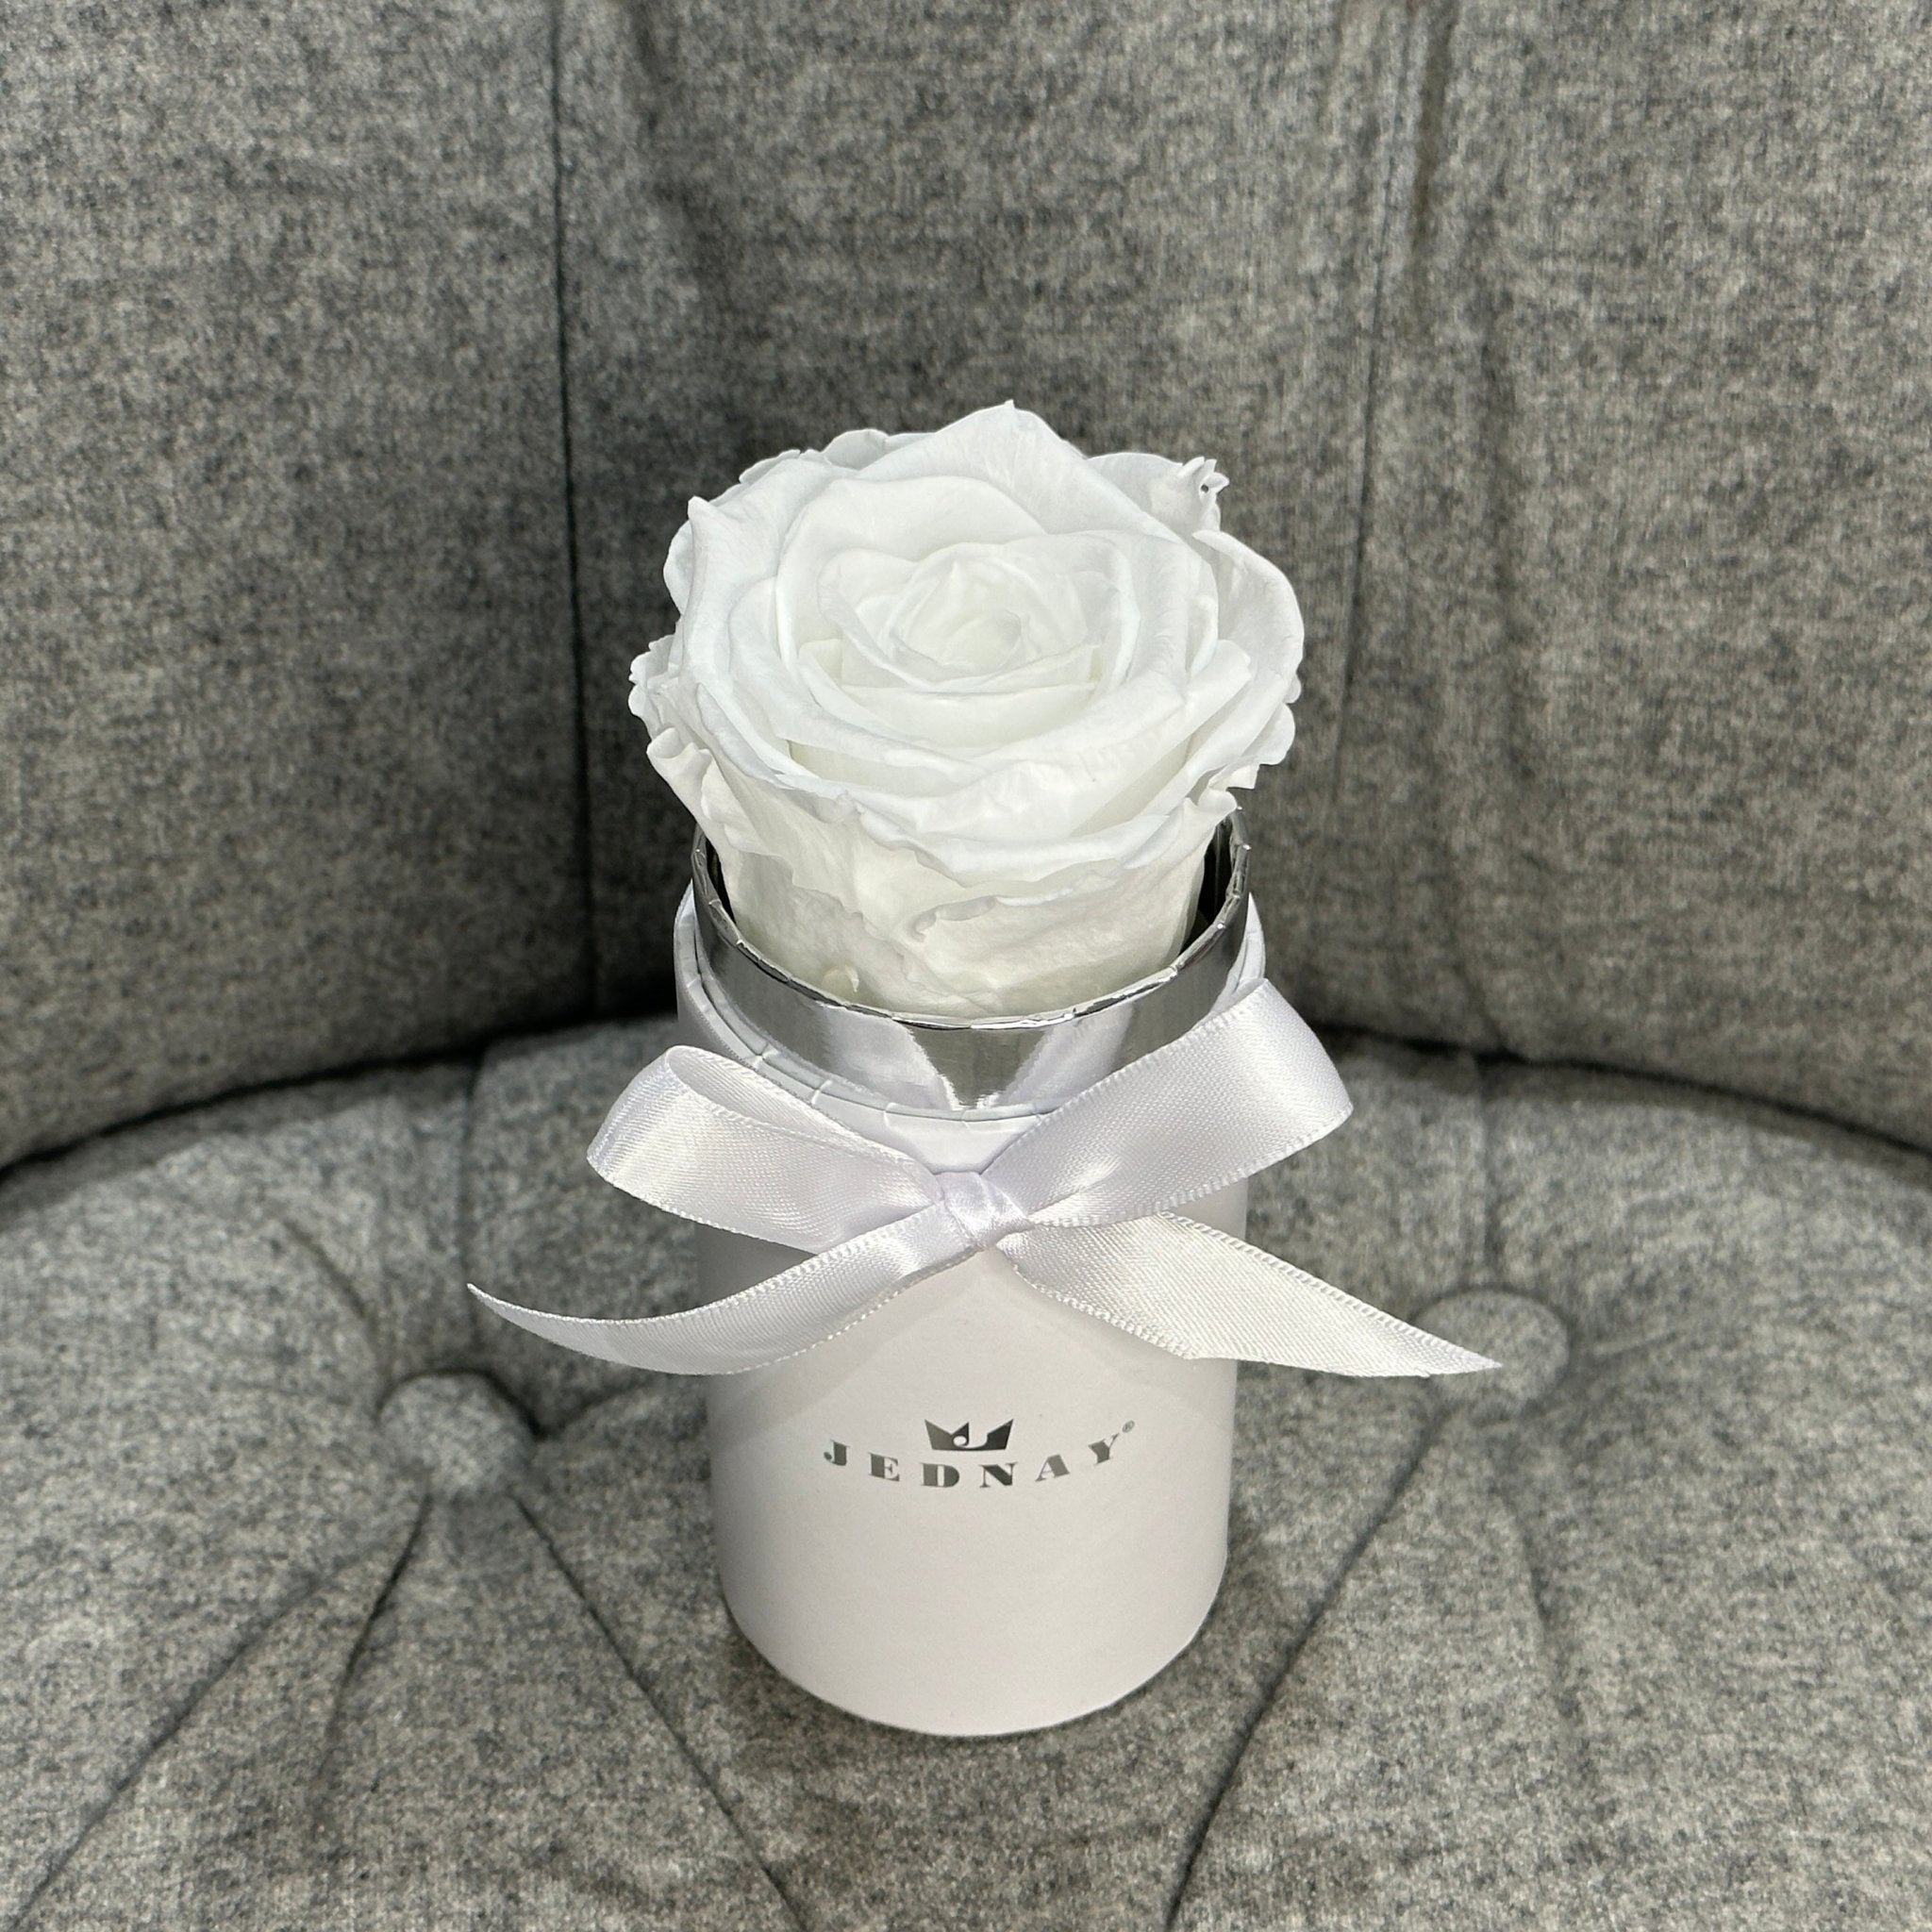 The Uno - Angel White Eternal Rose - Classic White Box - Jednay Roses